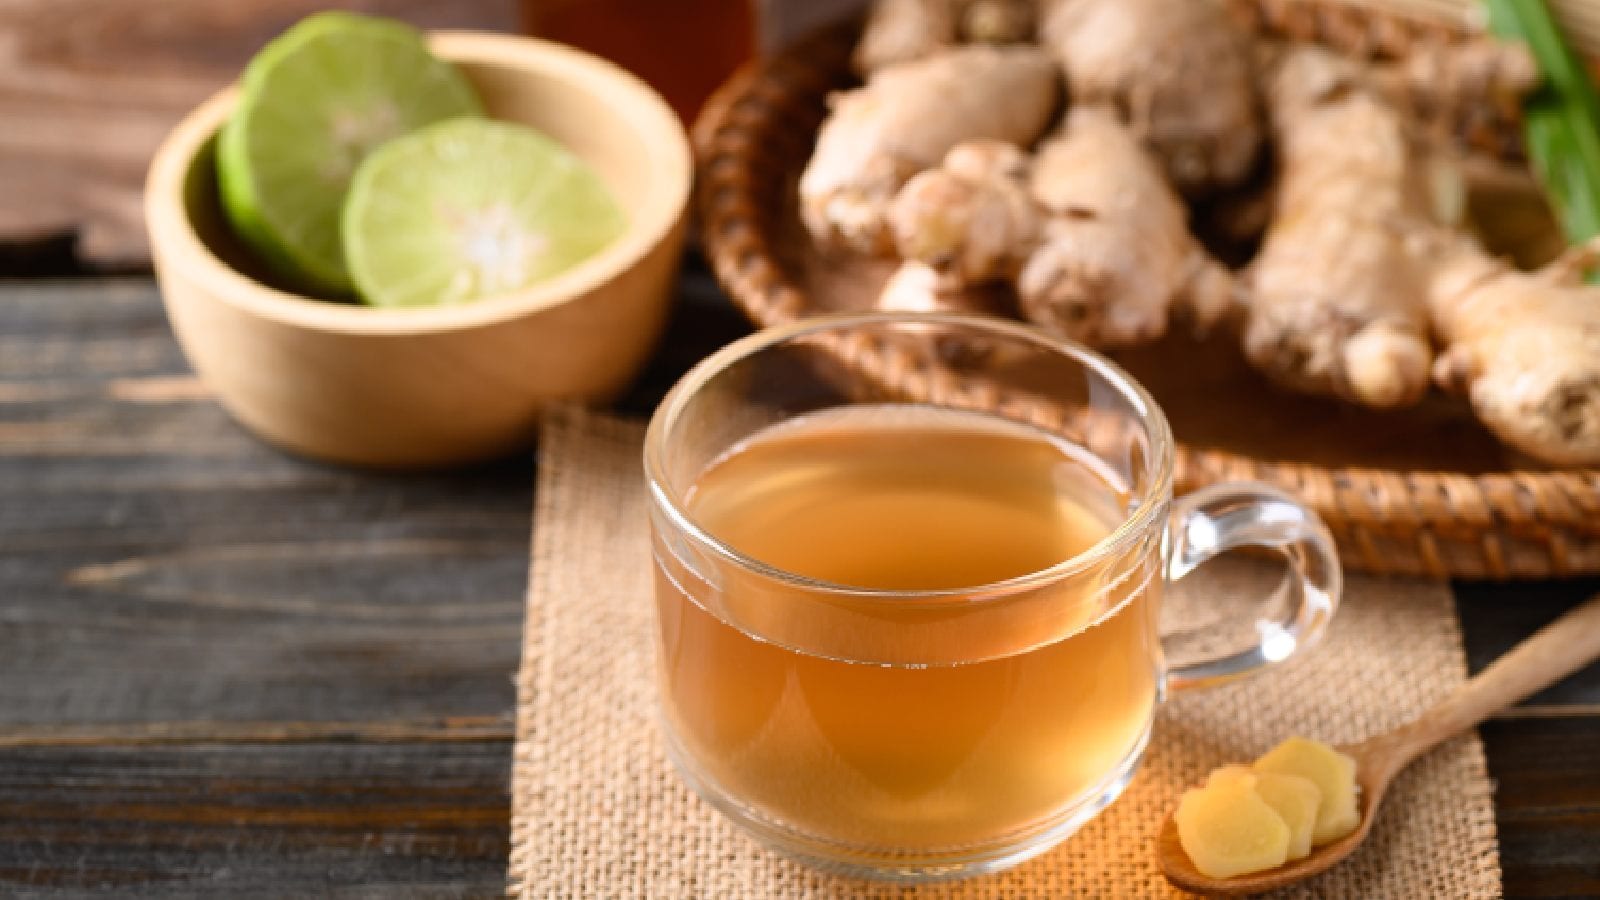 Know the benefits of consuming ginger juice on an empty stomach